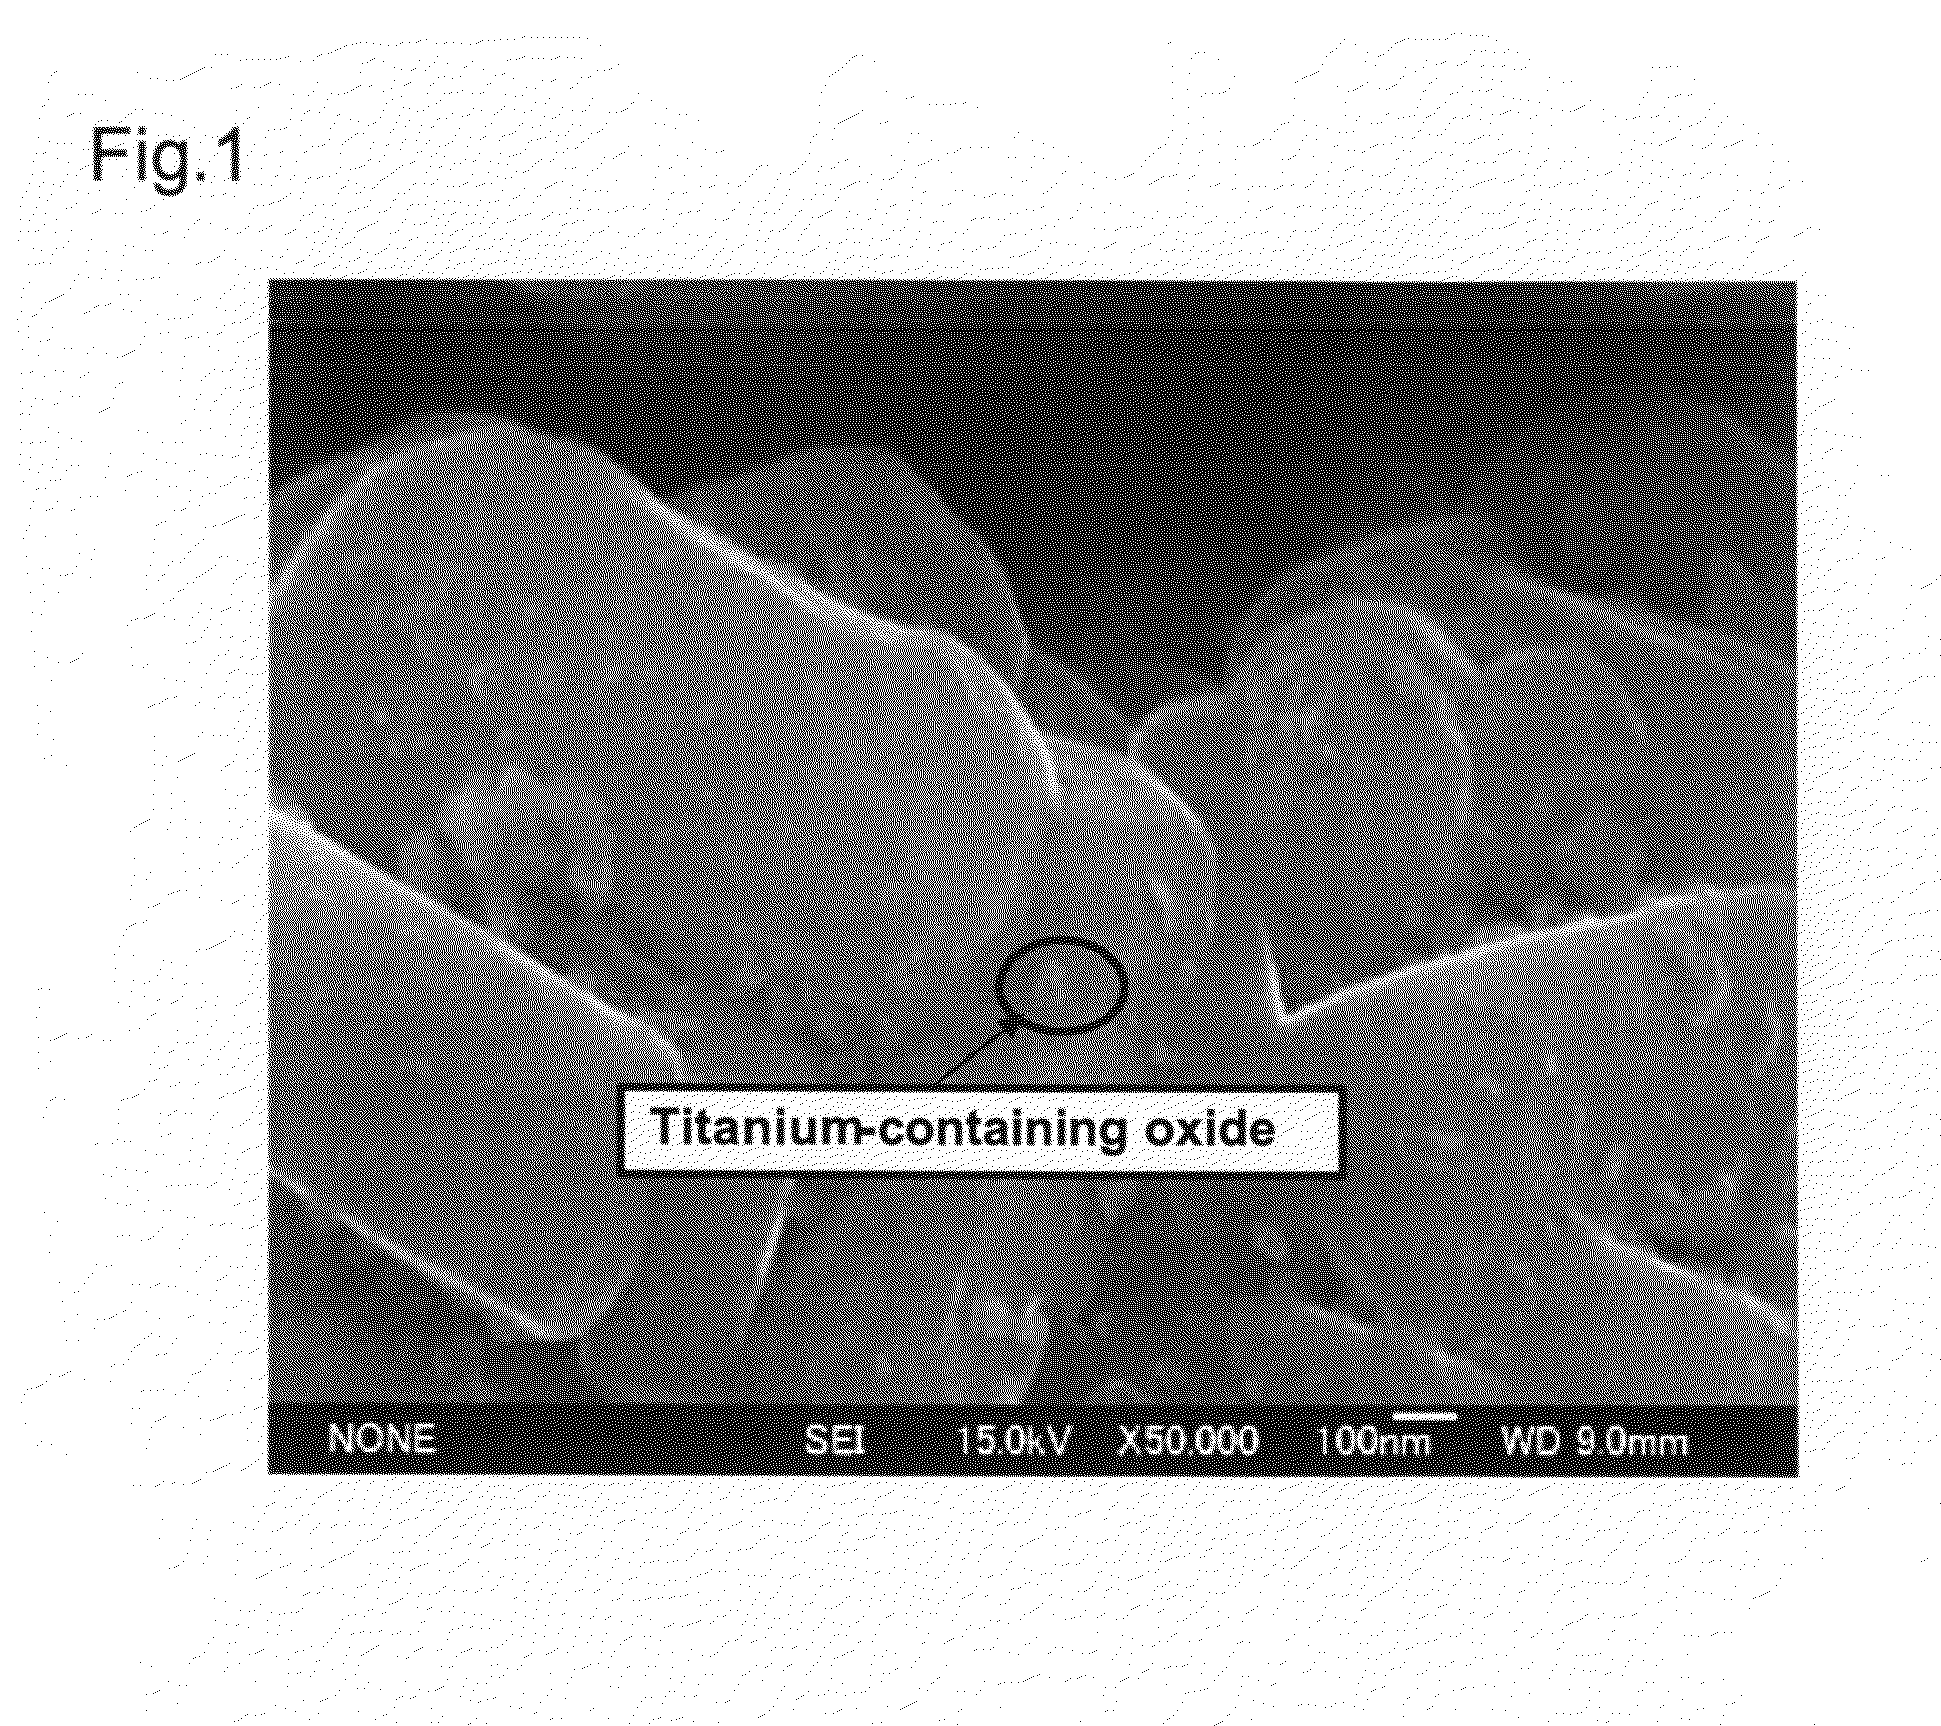 Non-aqueous electrolyte secondary battery and method of manufacturing the same